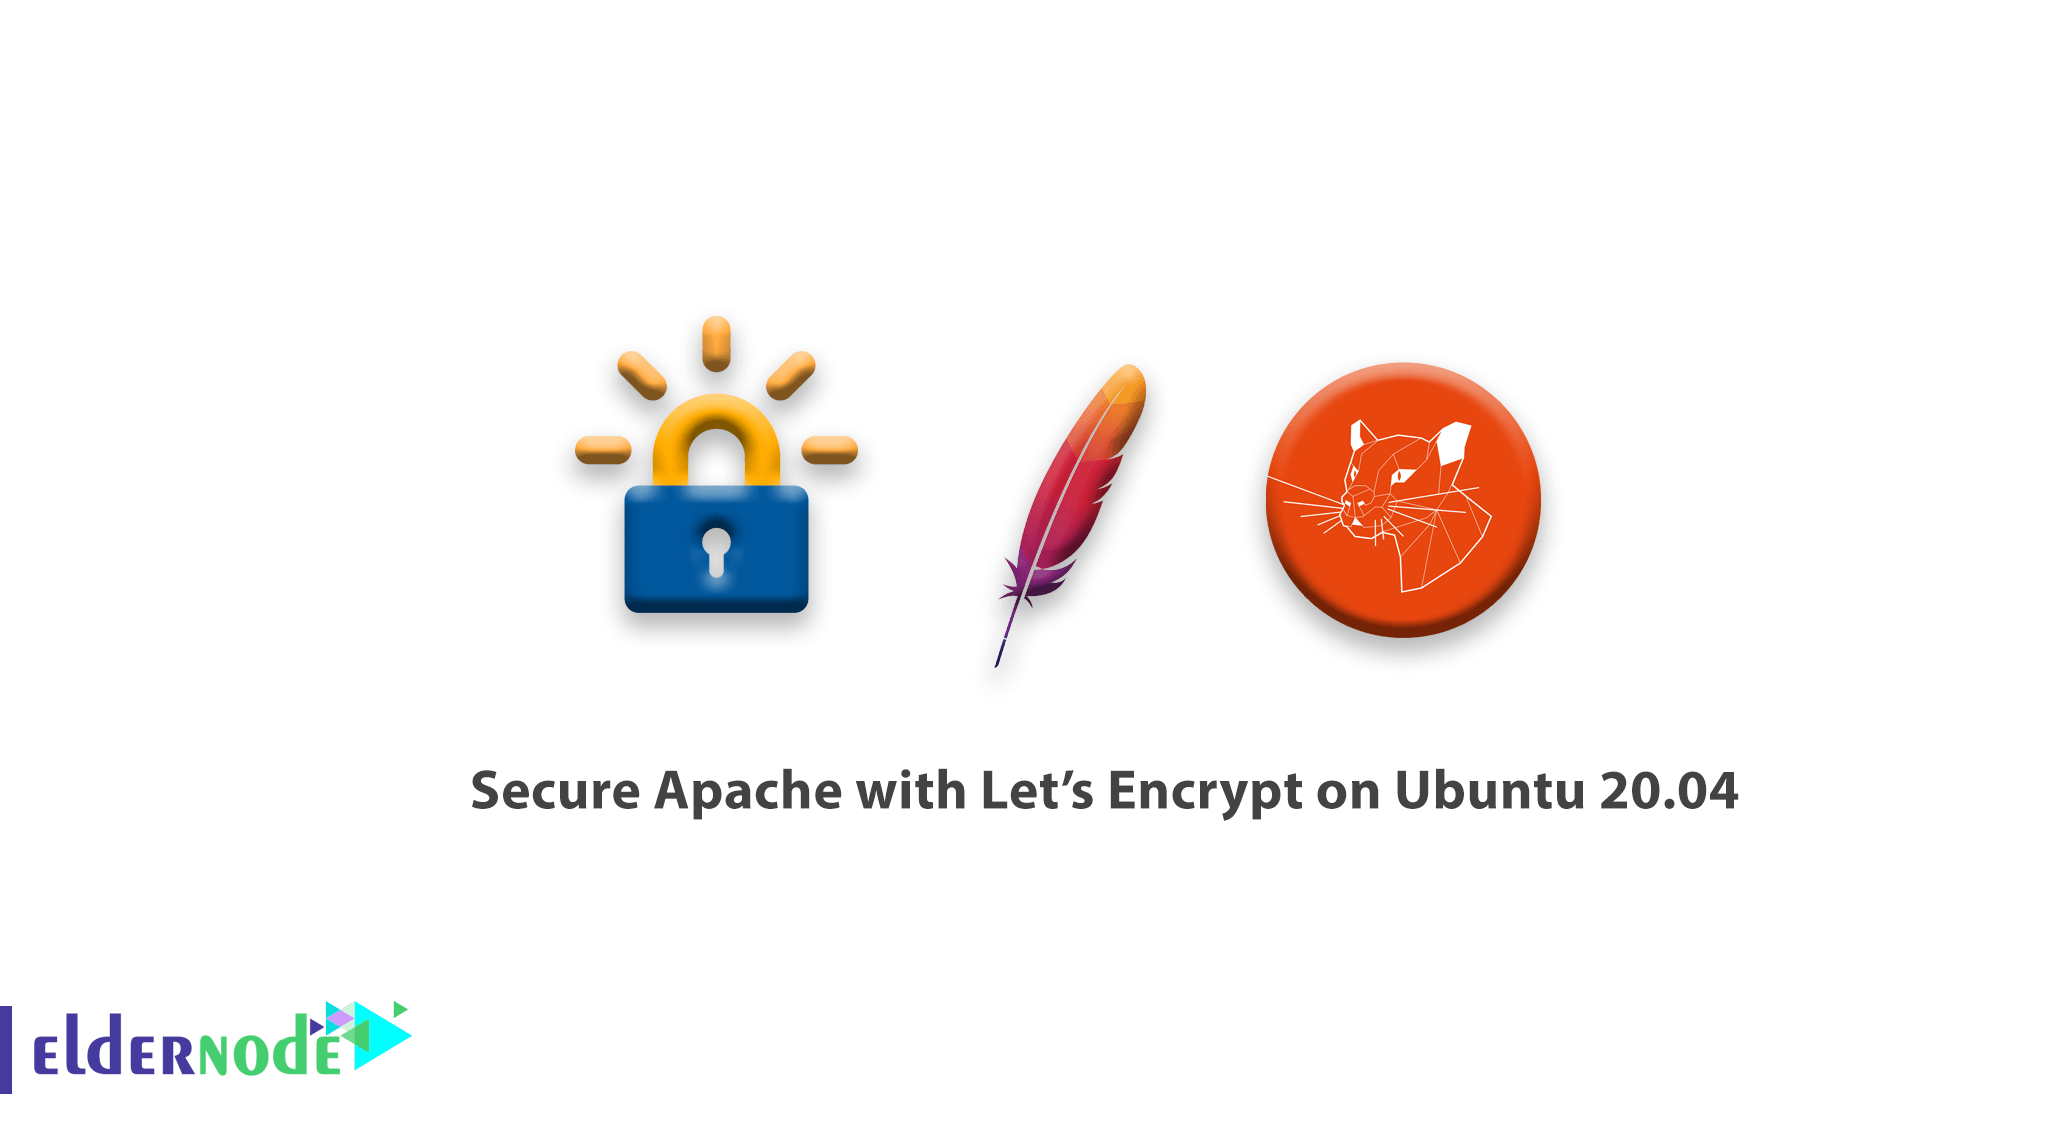 How to secure Apache with Let's Encrypt on Ubuntu 20.04